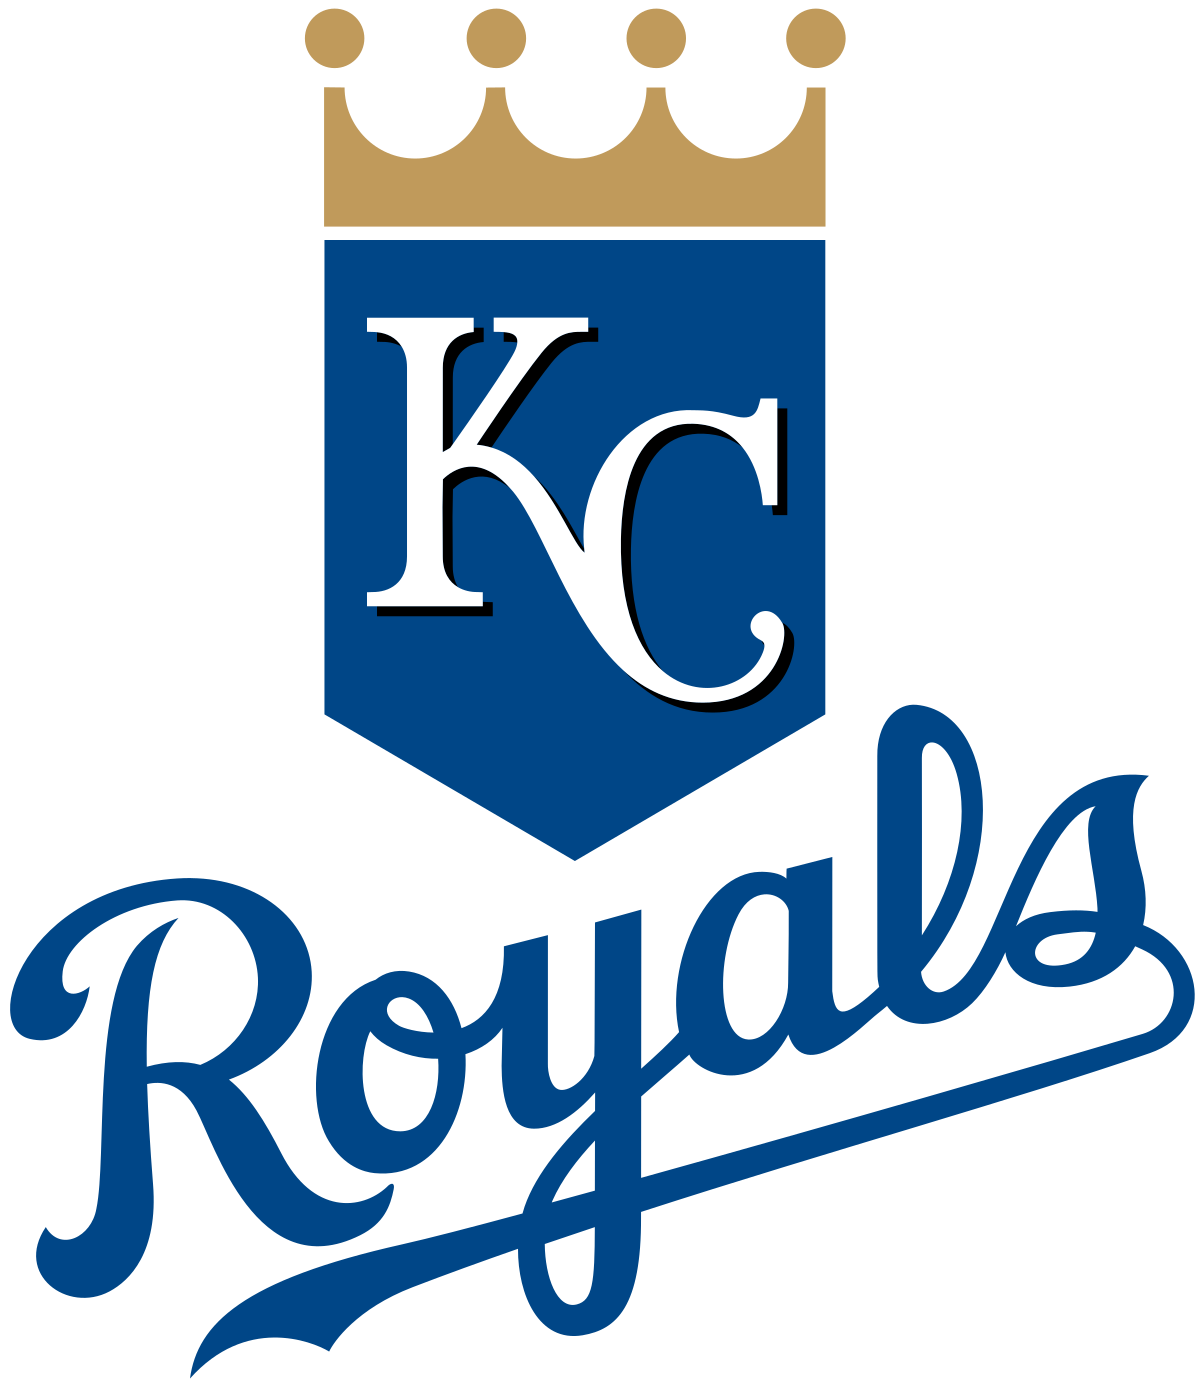 Royals' City Connect uniforms: Here's a first look at photos